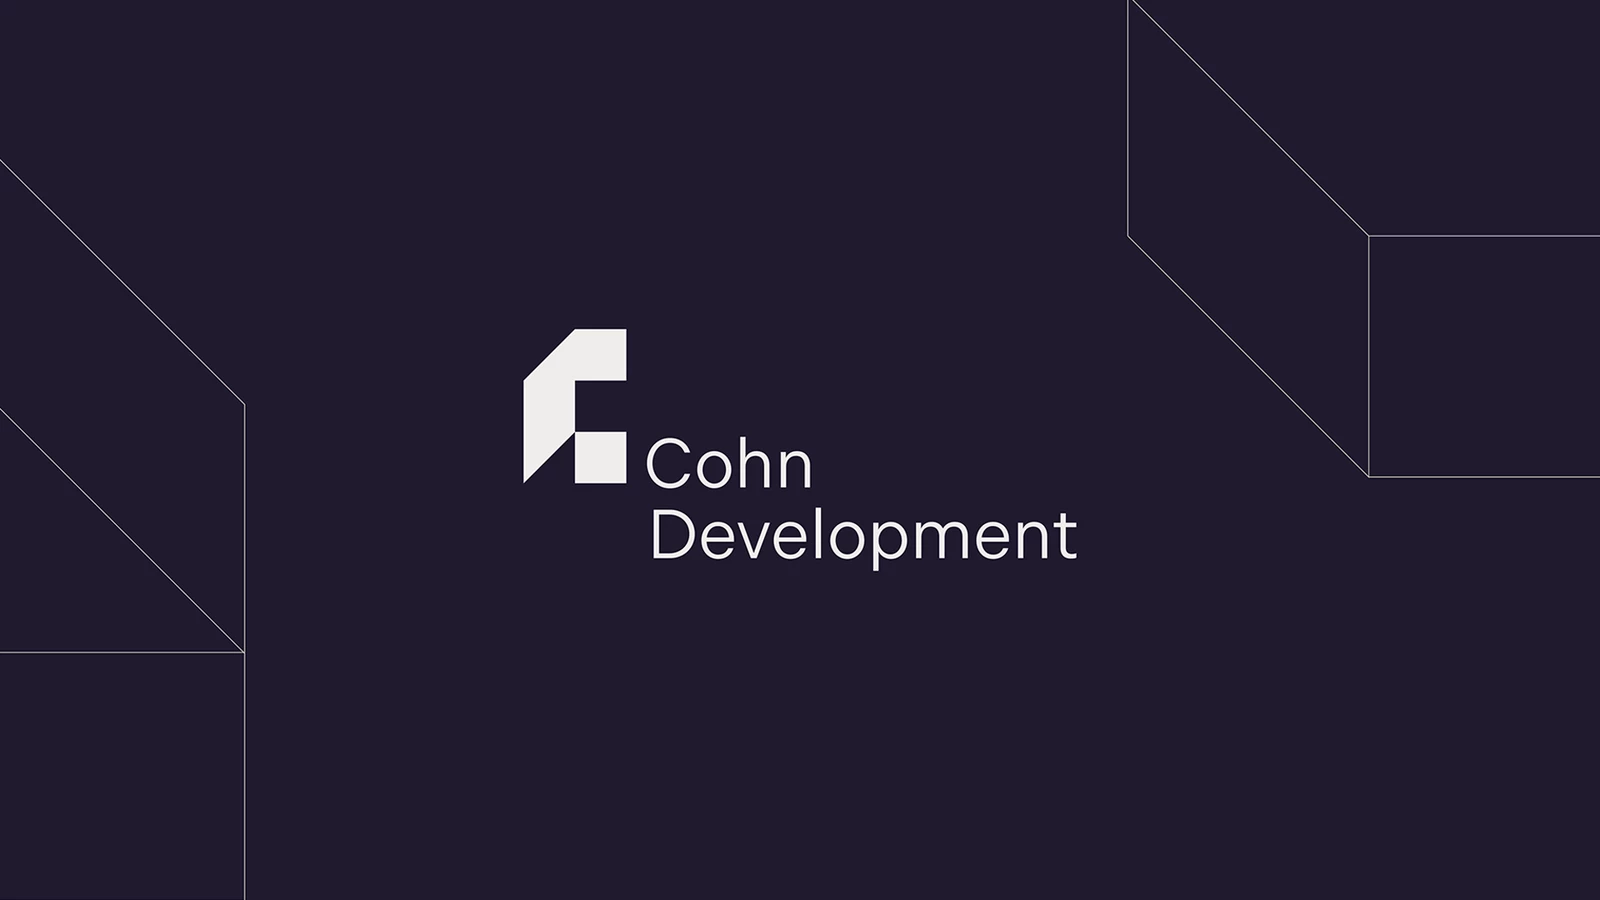 The new Cohn Development identity builds on a historic foundation